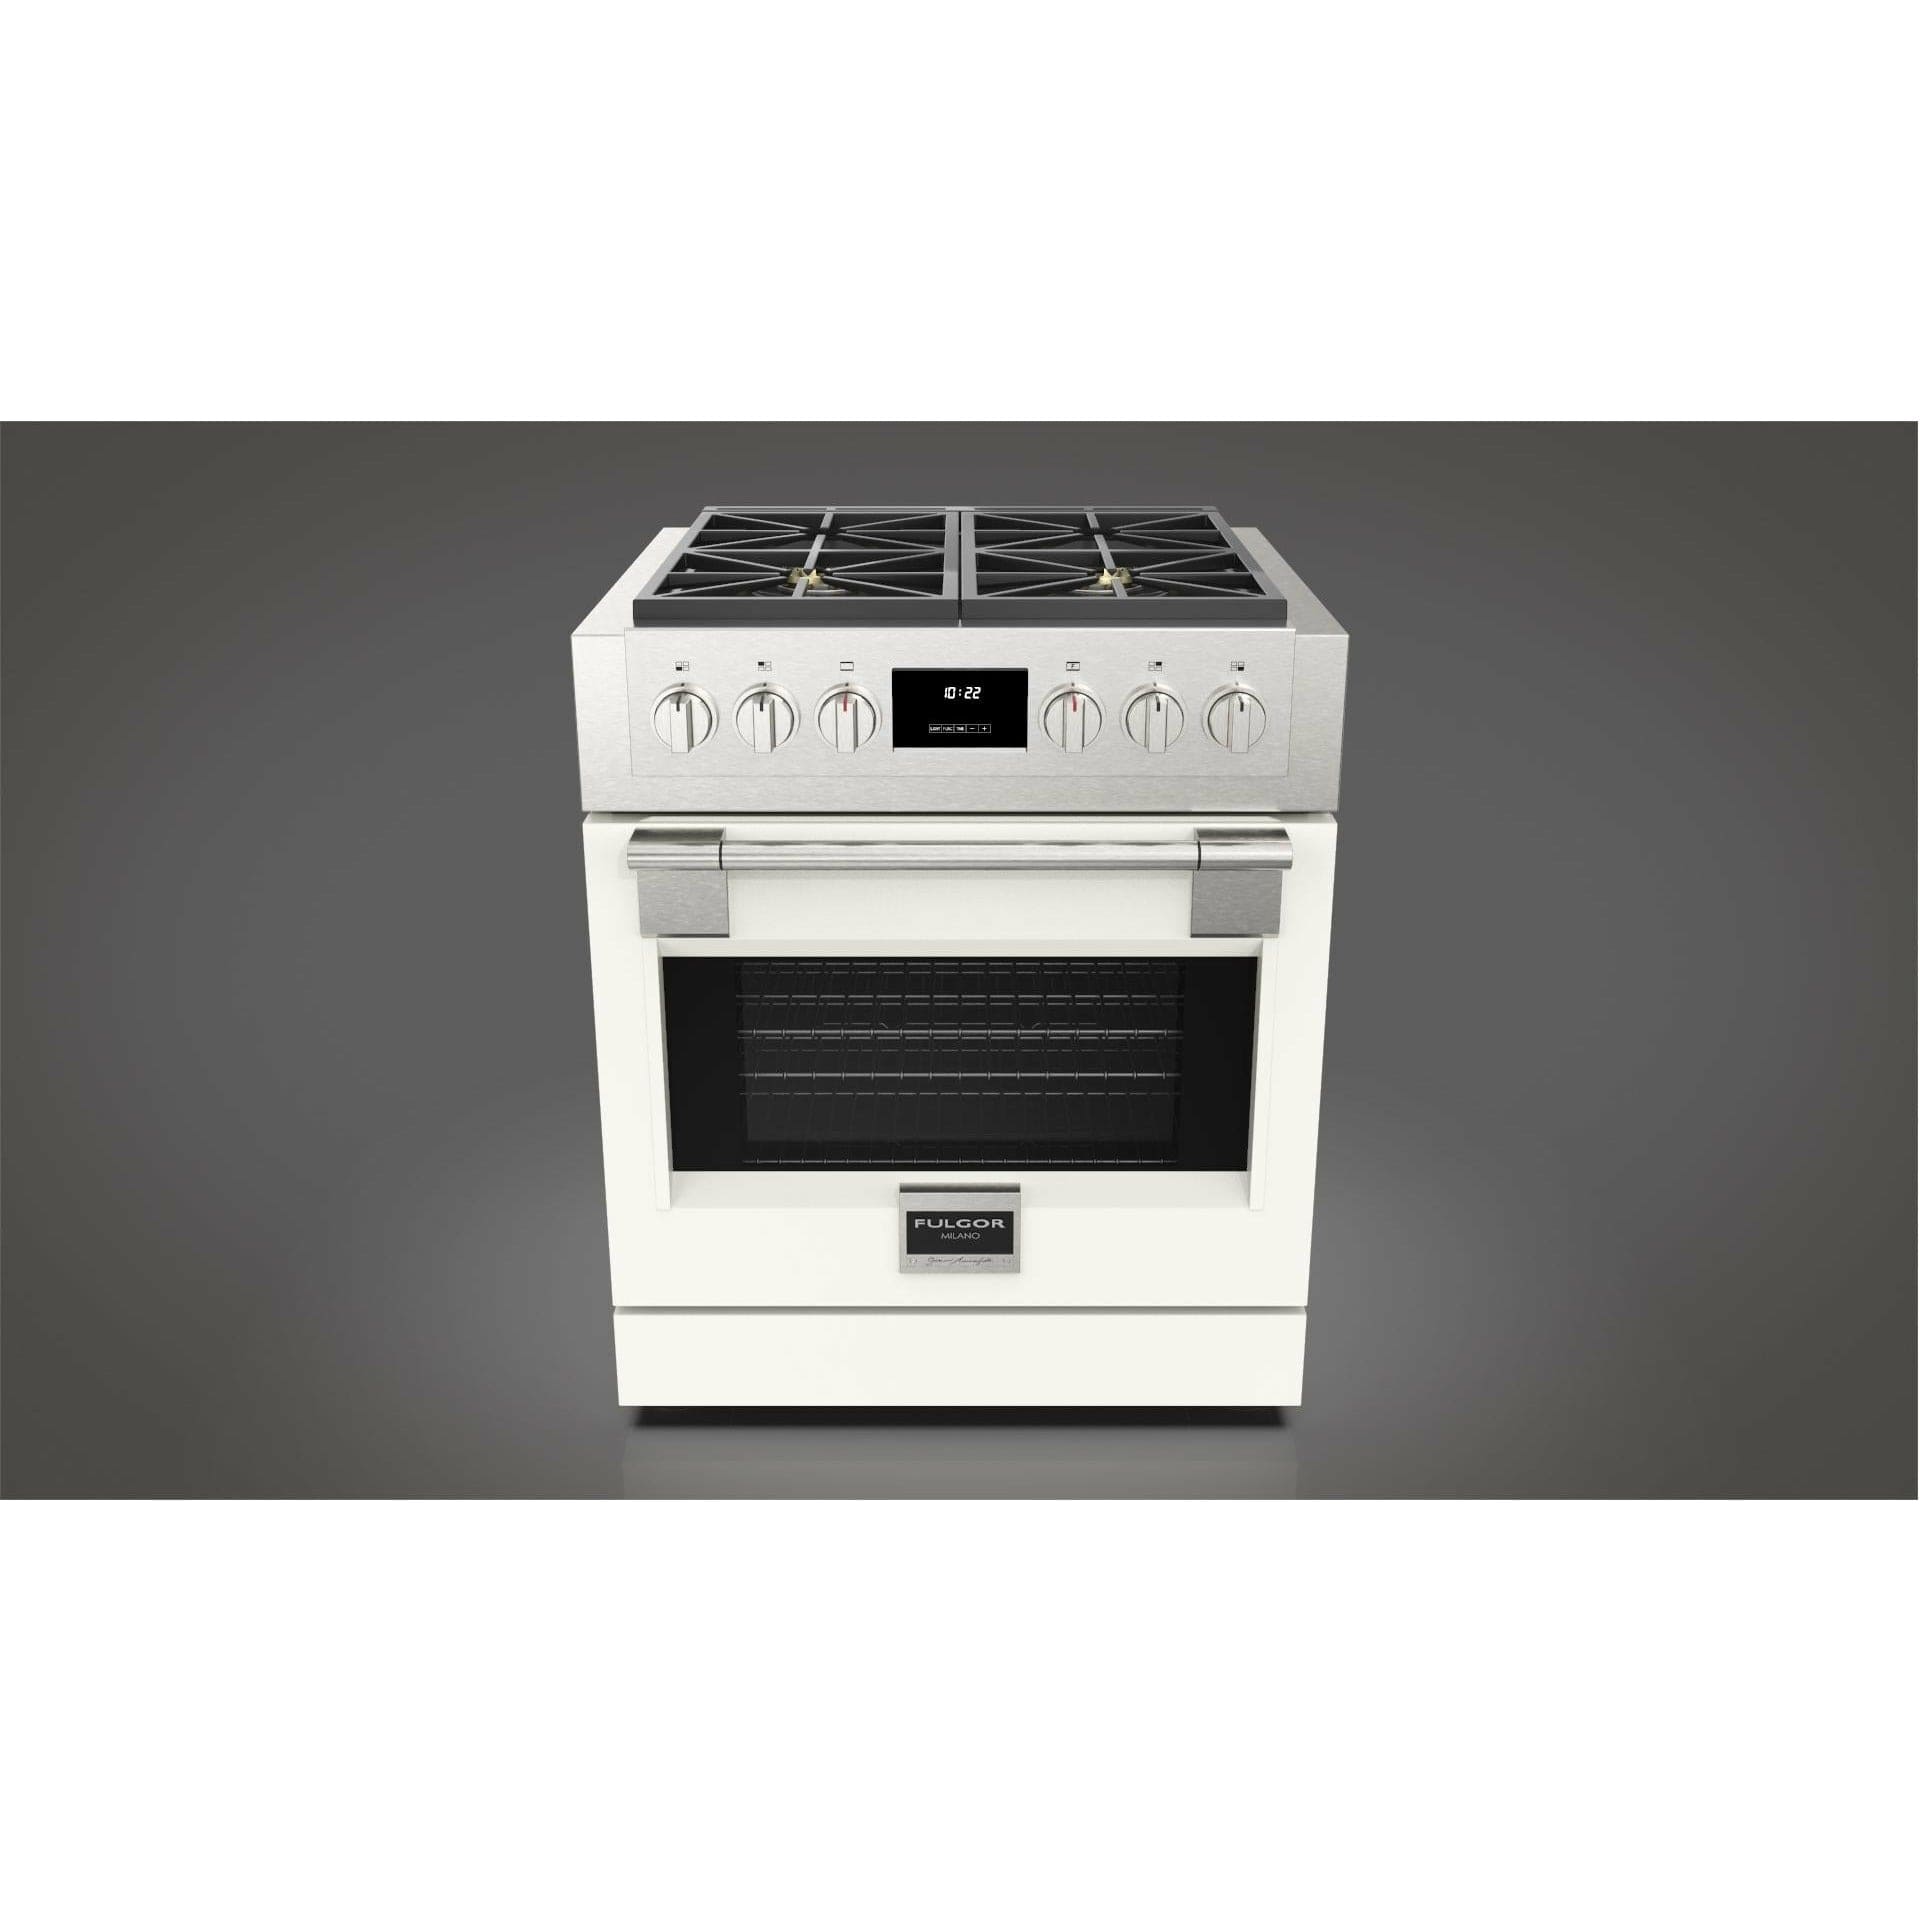 Fulgor Milano 30" Professional All Gas Range with 4 Dual-Flame Burners, 4.4 cu. ft. Capacity w/ Stainless Steel - F6PGR304S2 Ranges PDRKIT30MW Luxury Appliances Direct